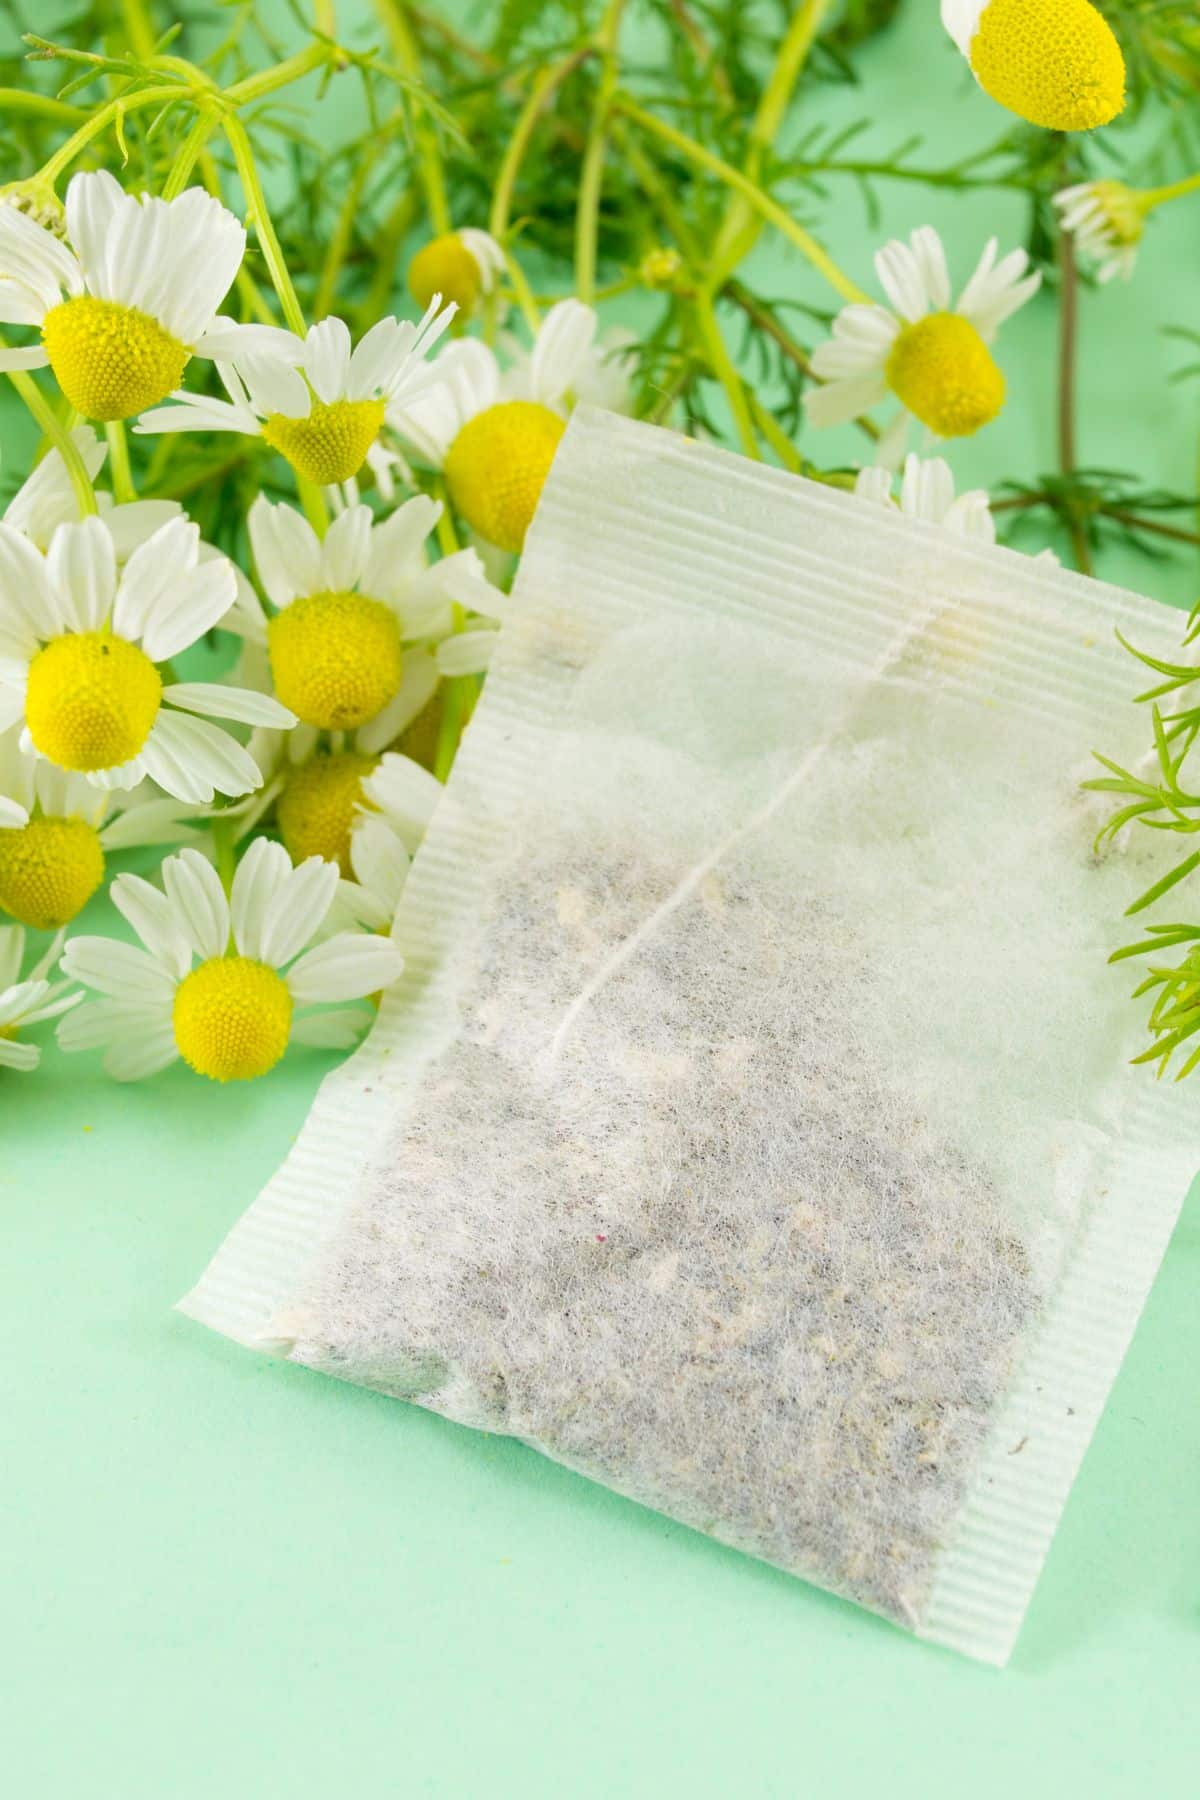 a chamomile tea bag in front of a bunch of chamomile flowers.